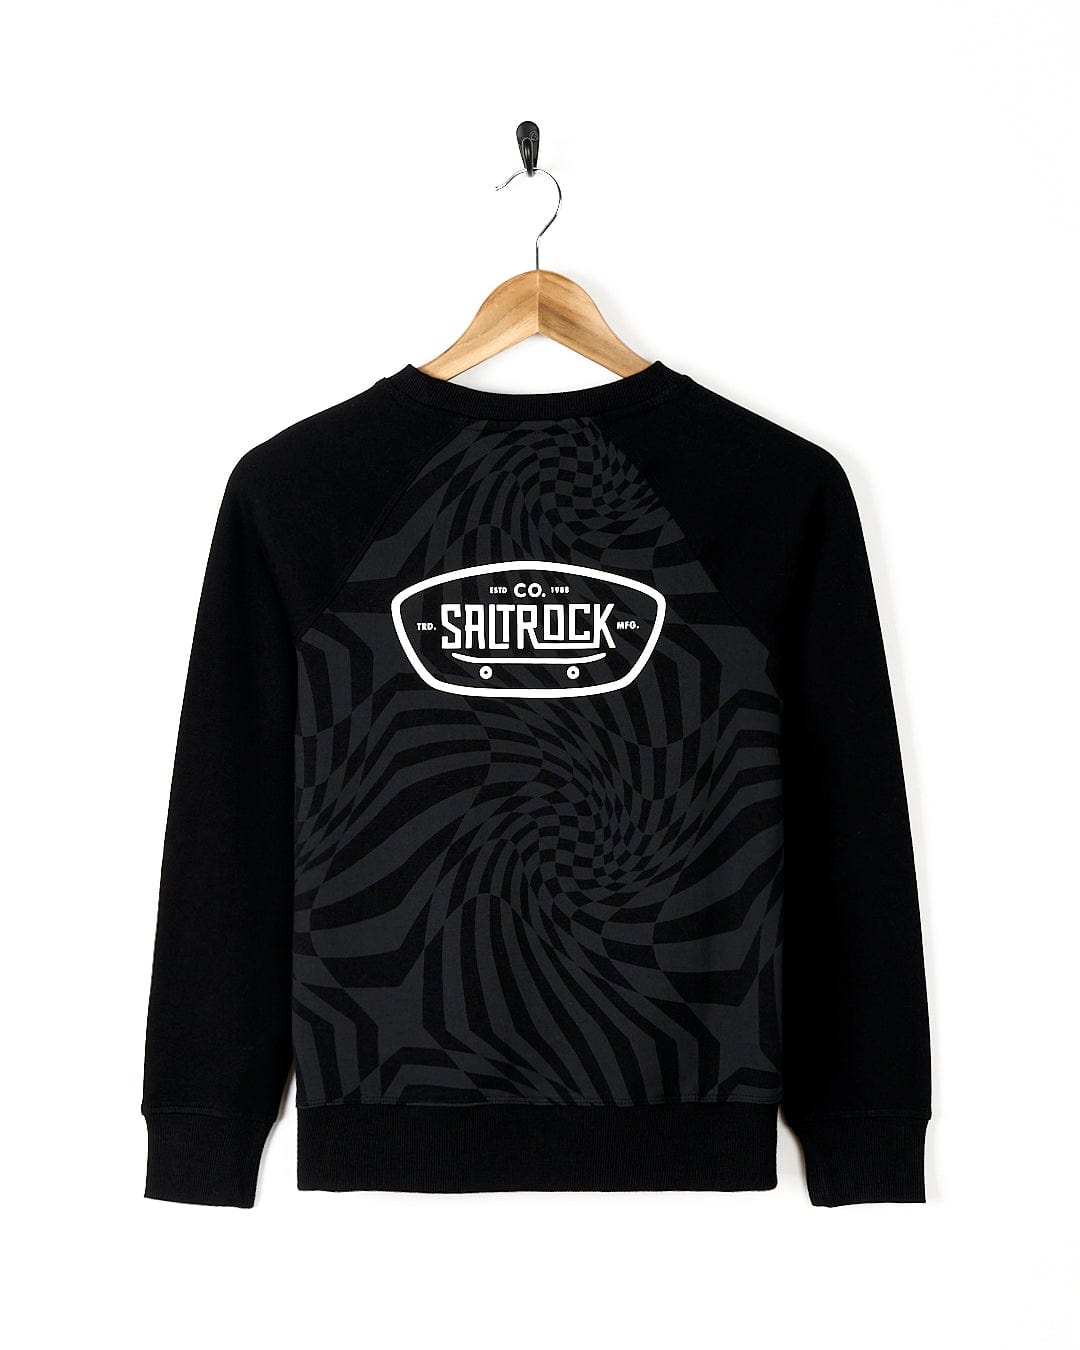 A black sweatshirt with the word Saltrock on it featuring a geometric print.